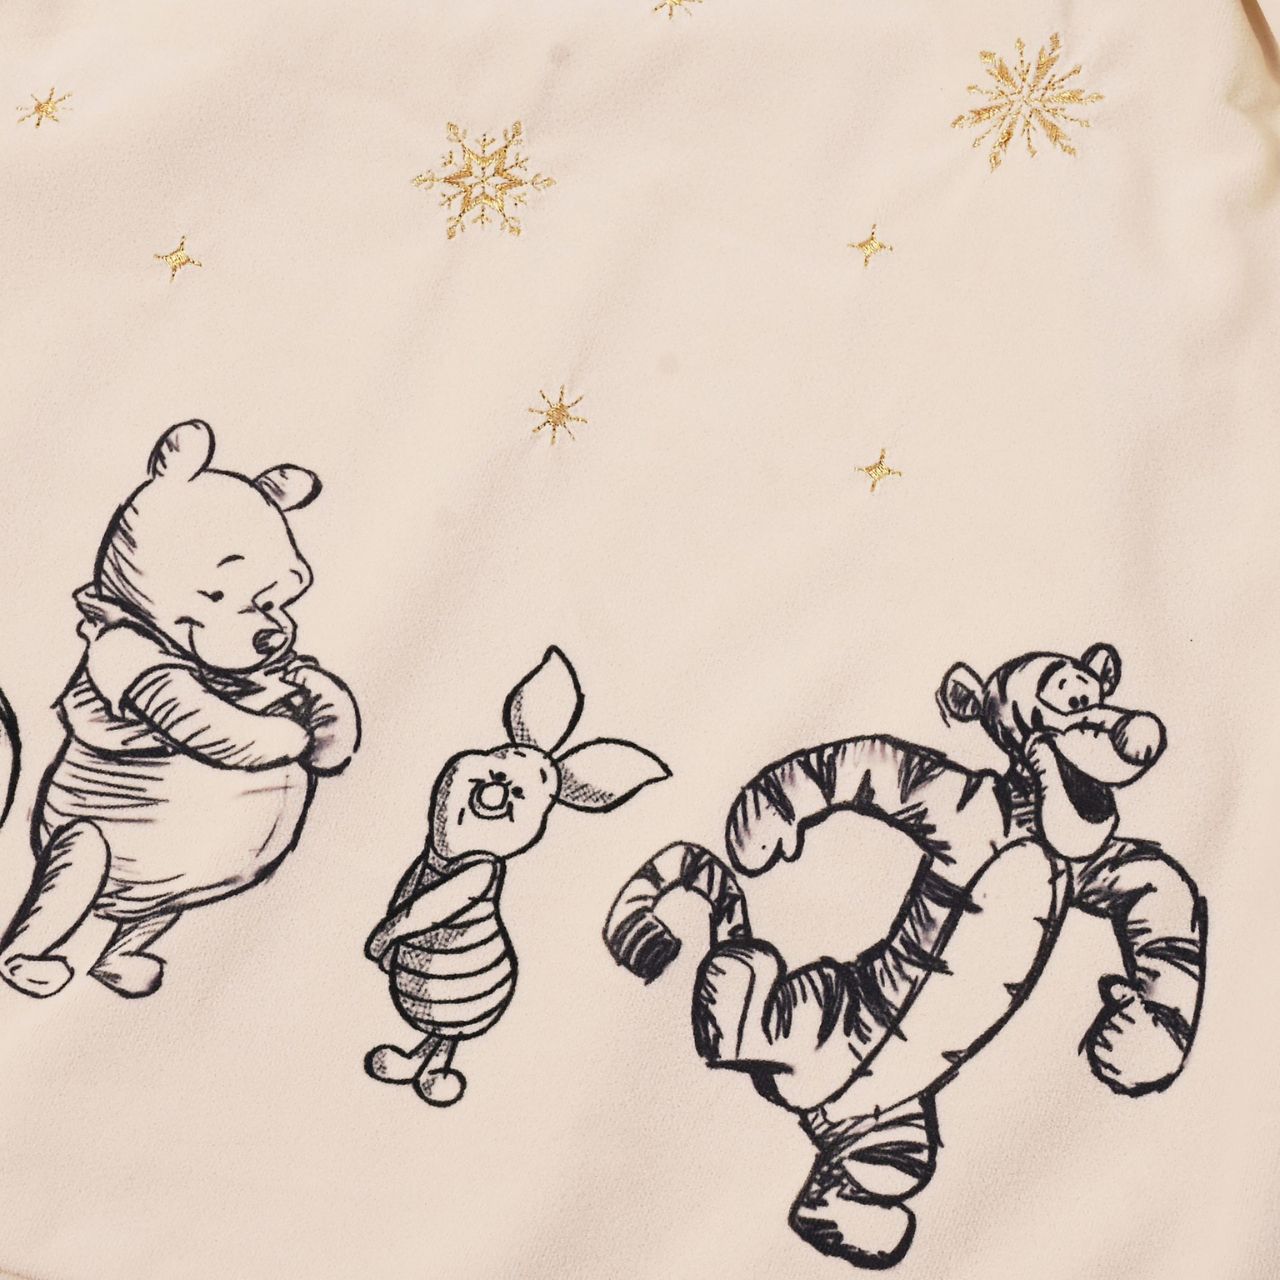 Disney Winnie the Pooh Xmas Sack  This sack features the most iconic characters from the family favourite book series, ideal for Winne the Pooh fans. Make Christmas morning a little more magical by storing their presents in this glitter-detailed sack.